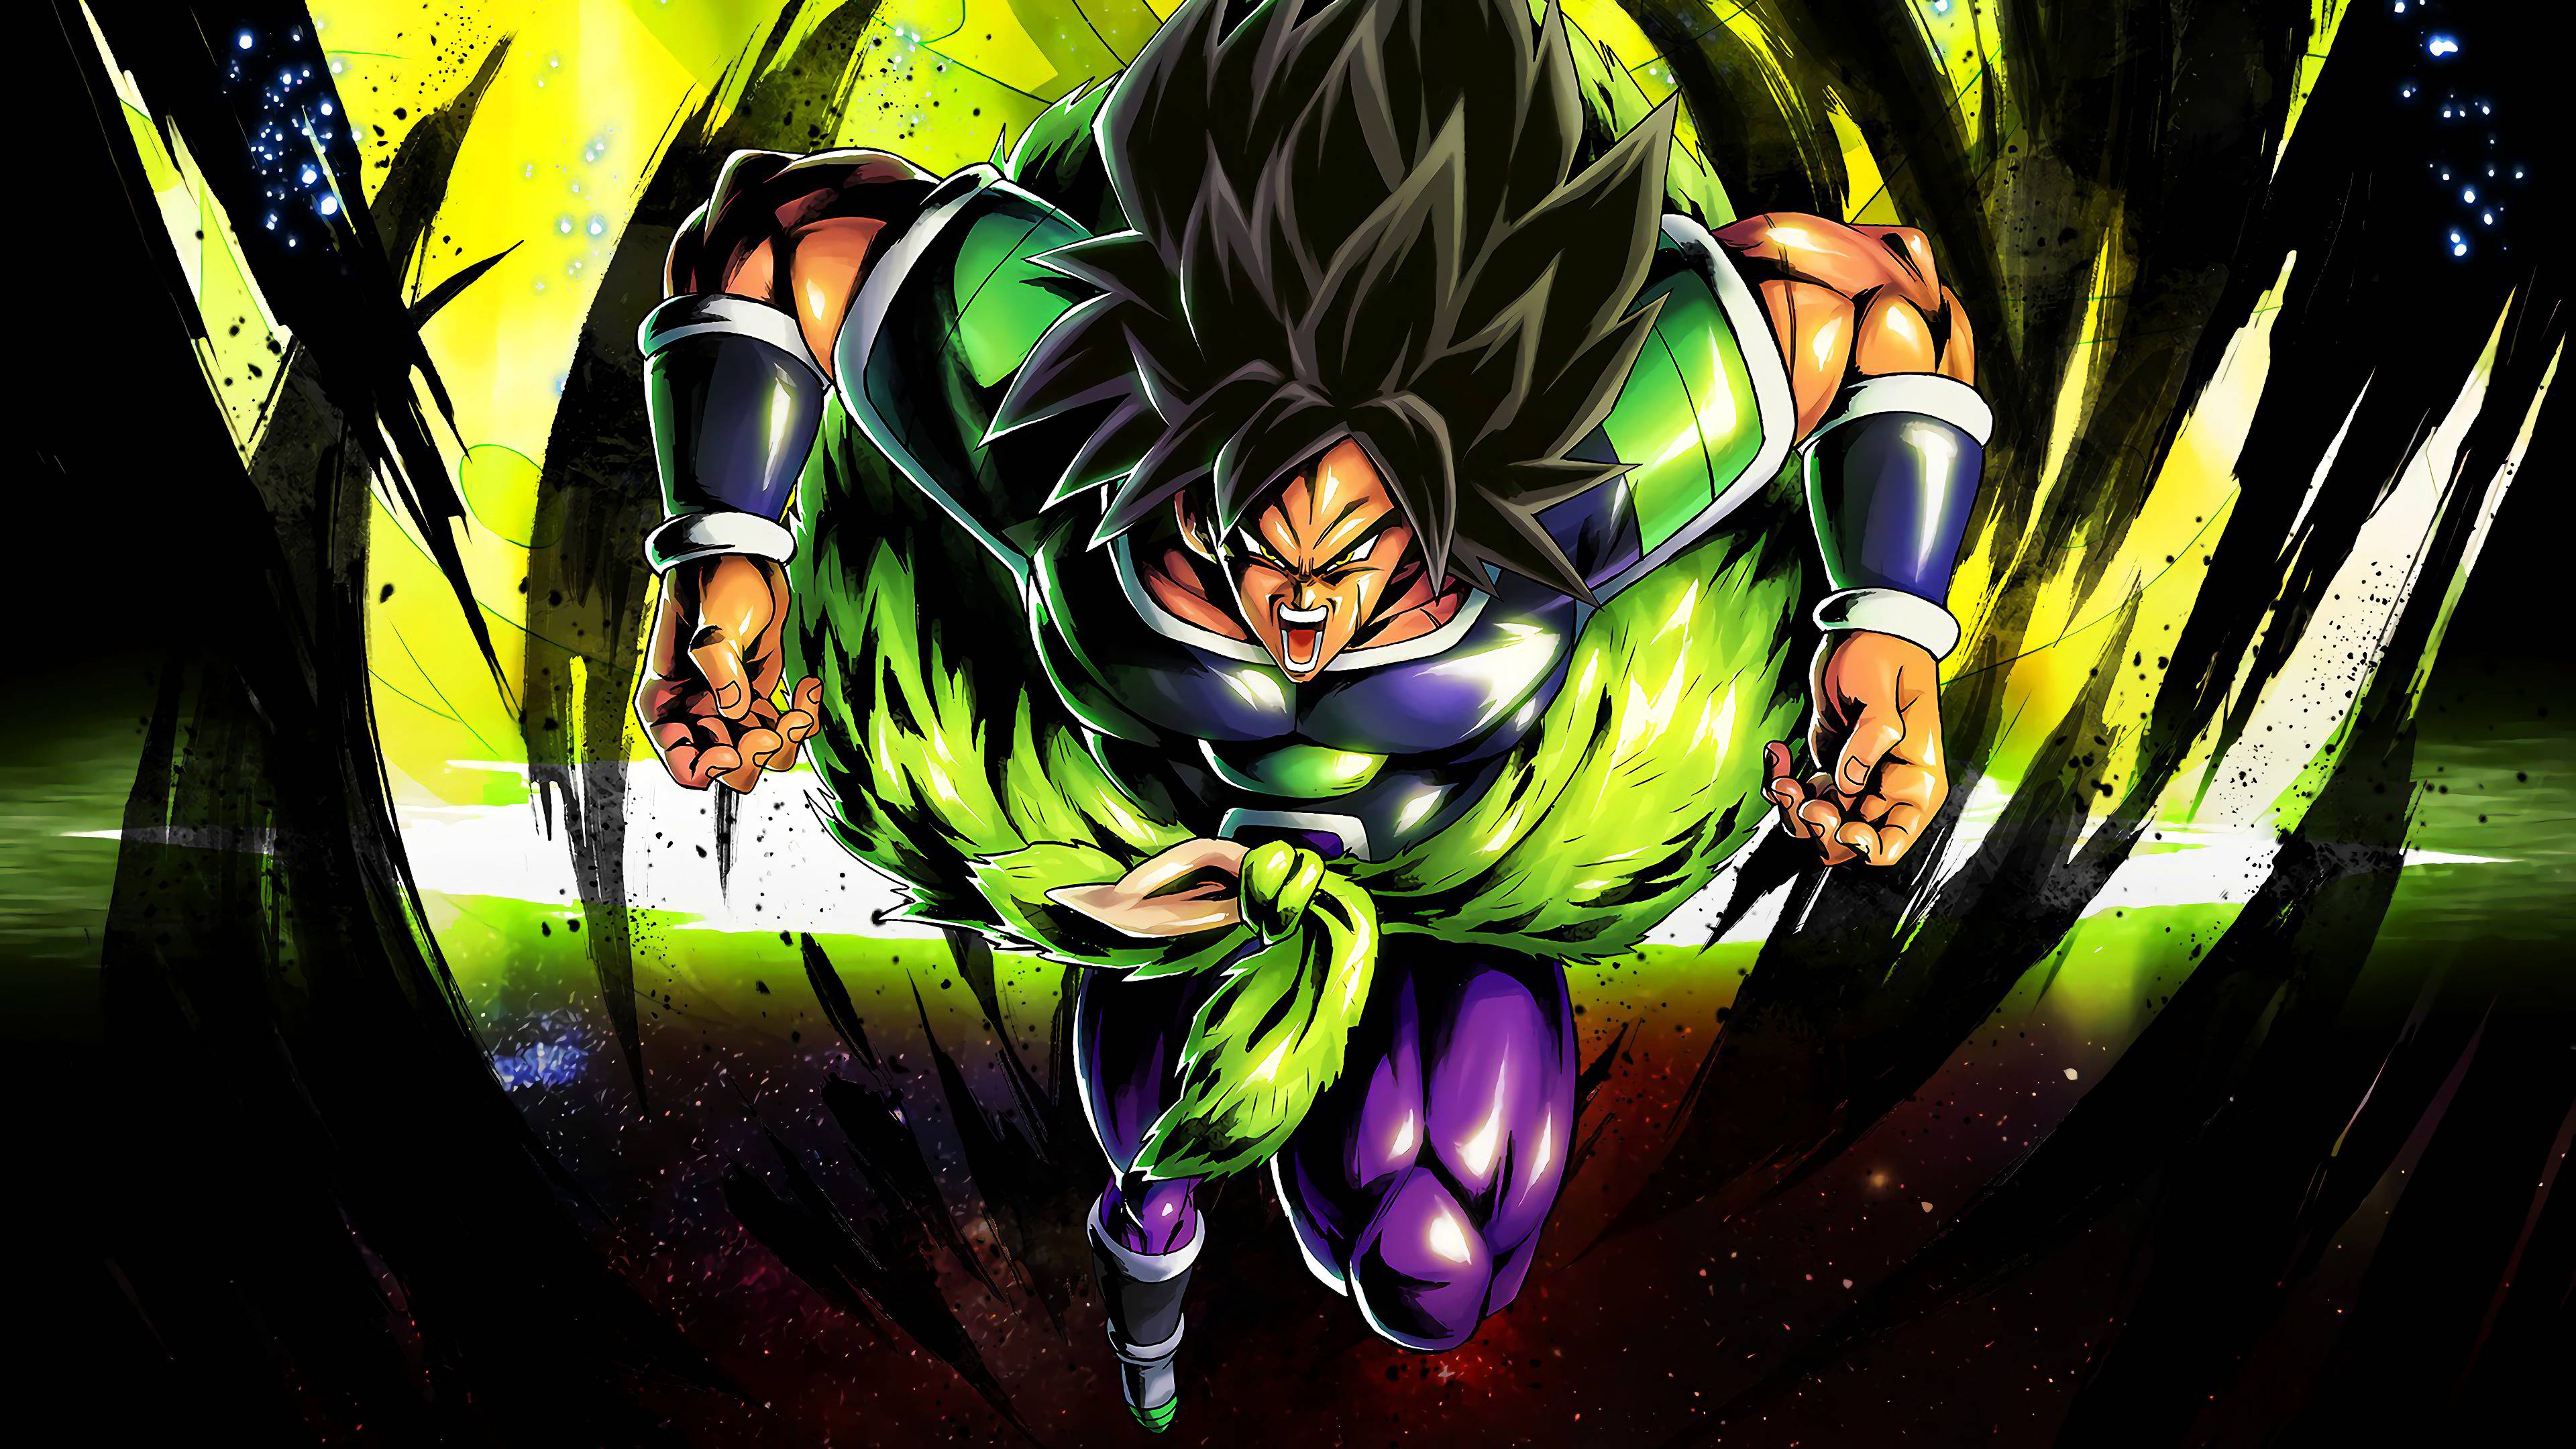 Dragon Ball Super Broly Wallpapers - Top Free Dragon Ball Super Broly